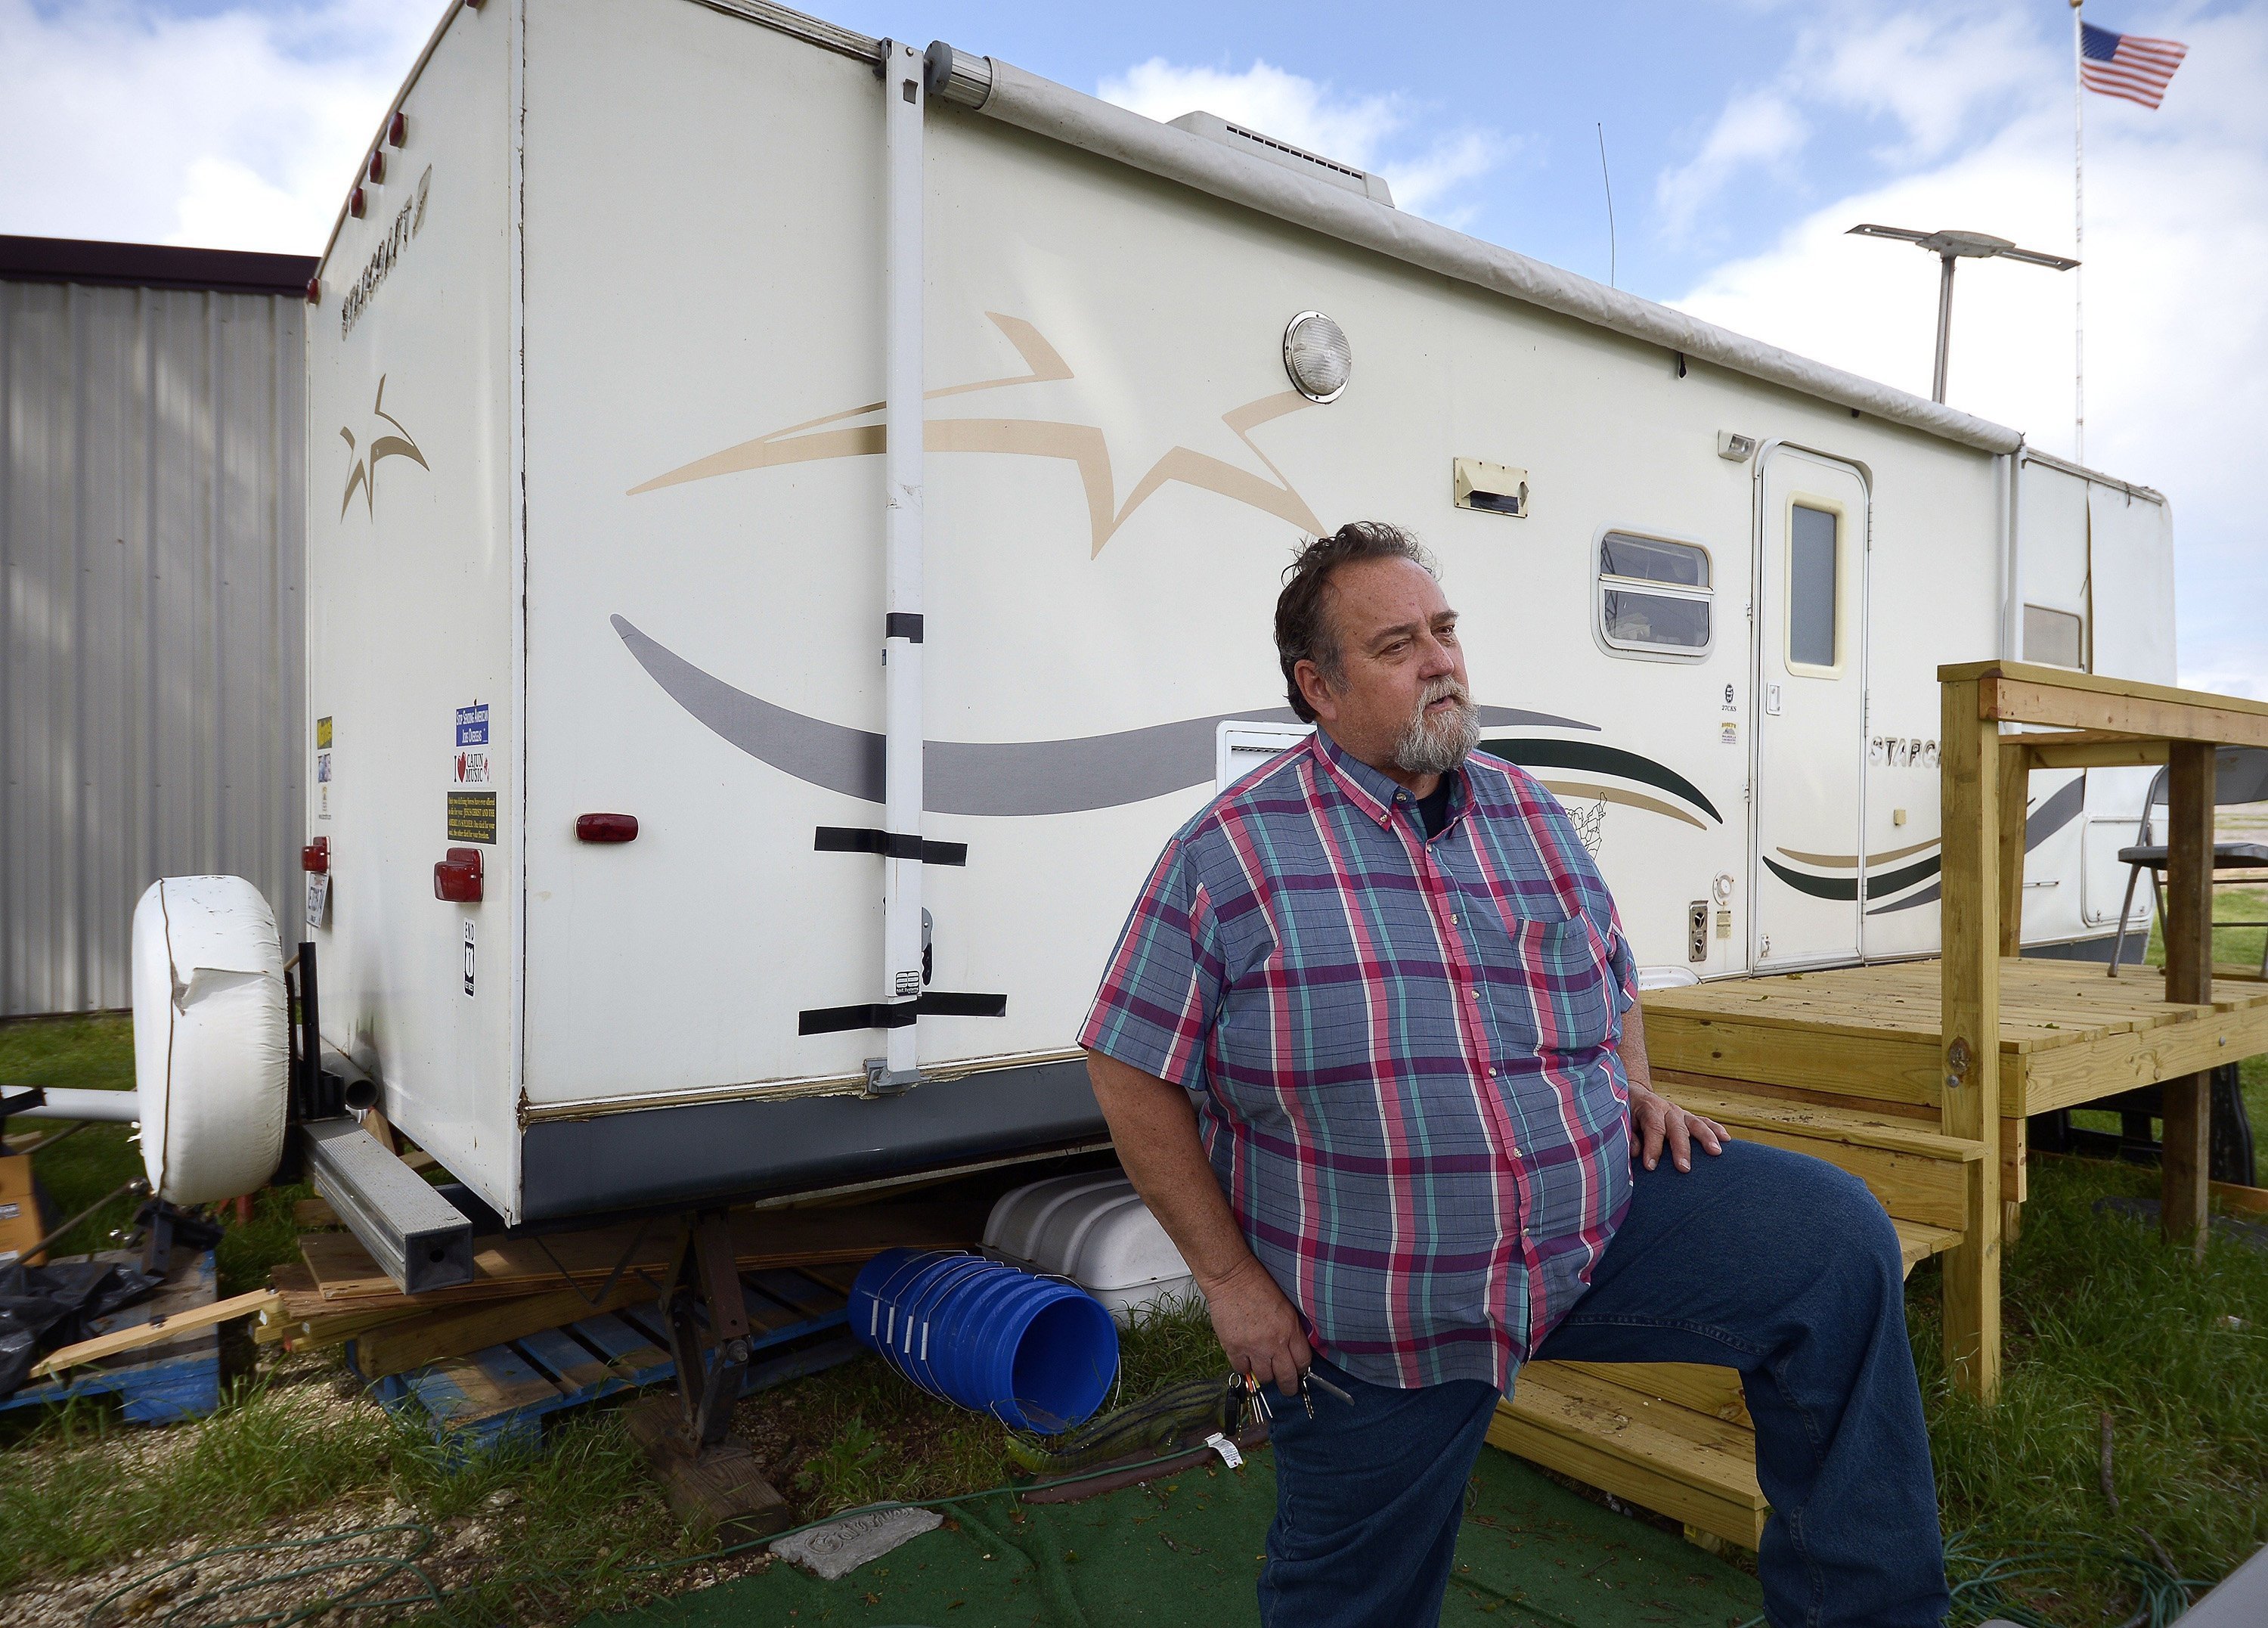 John Raimer stands in front of his trailer that he lives in as he leads at the West Long Term Recovery team in West, Texas, on April 1, 2014.